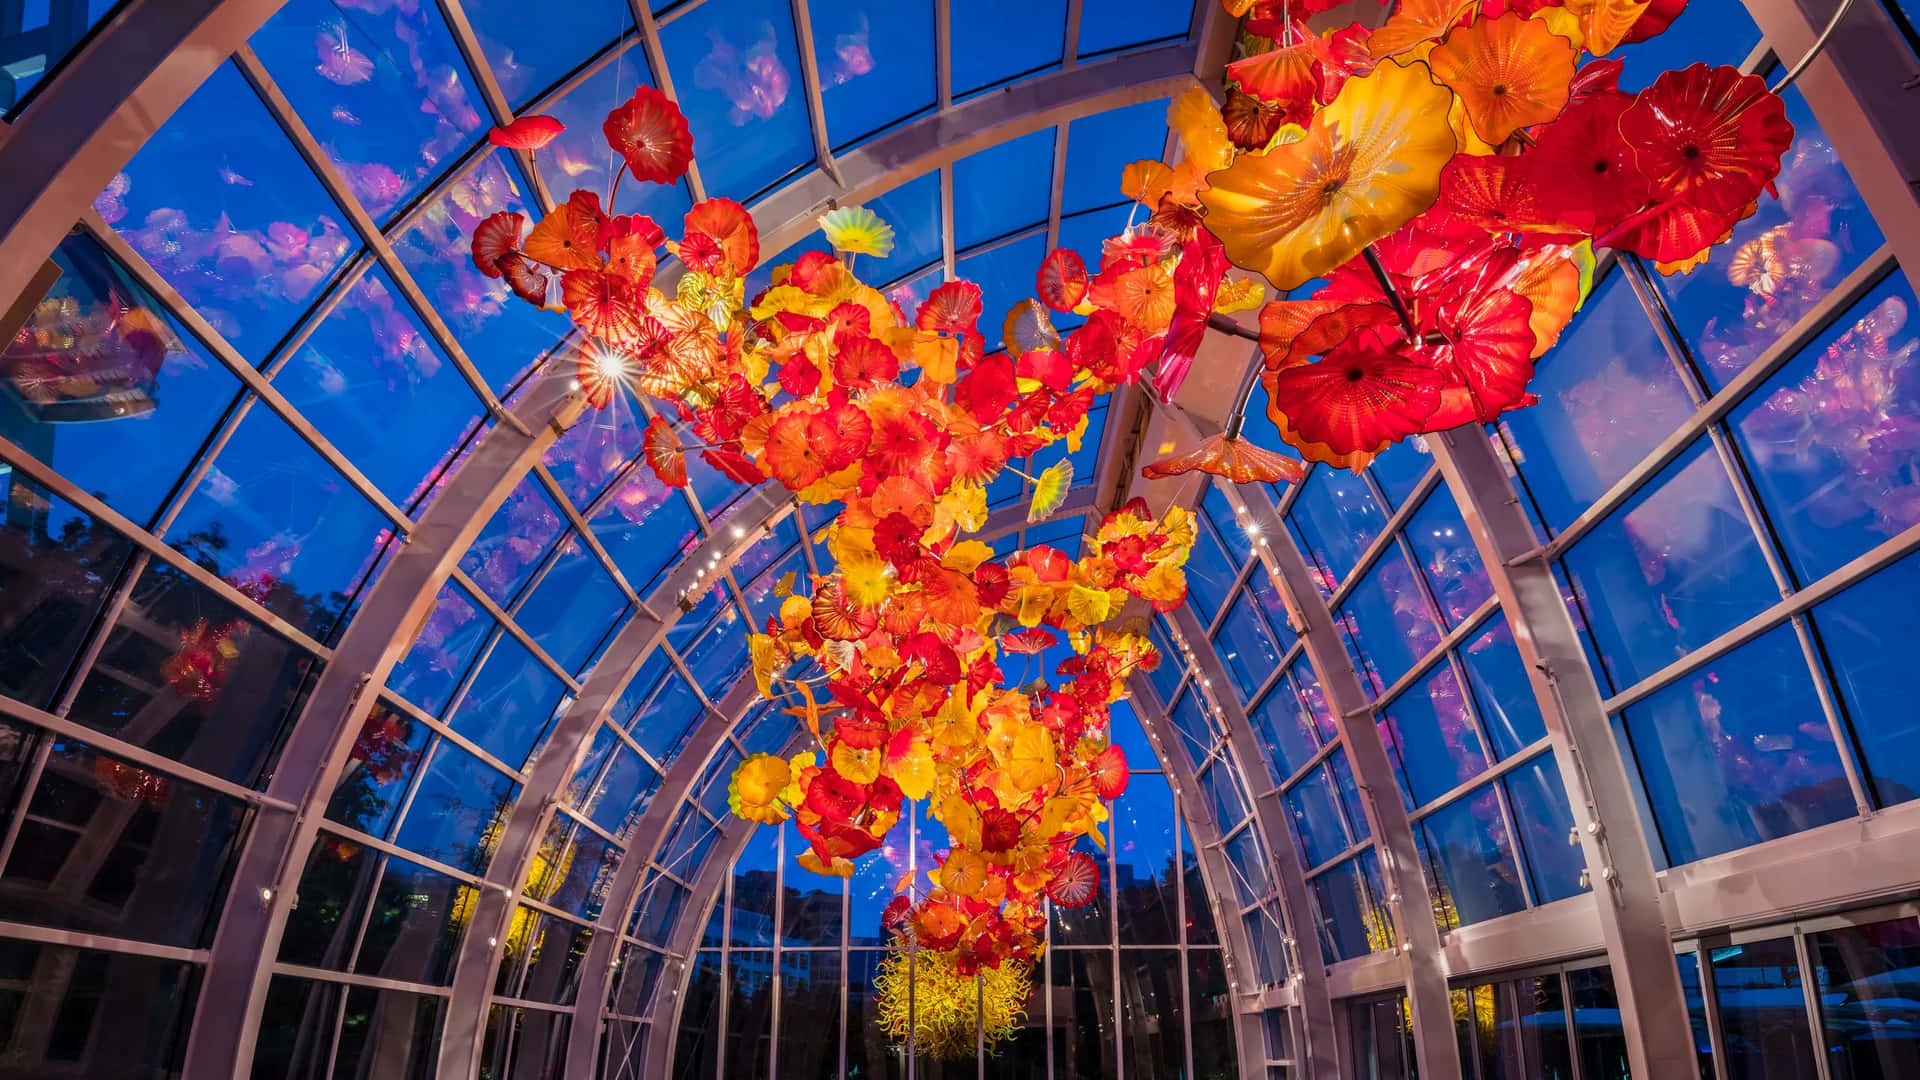 Chihuly Glass Flowers Ceiling Wallpaper